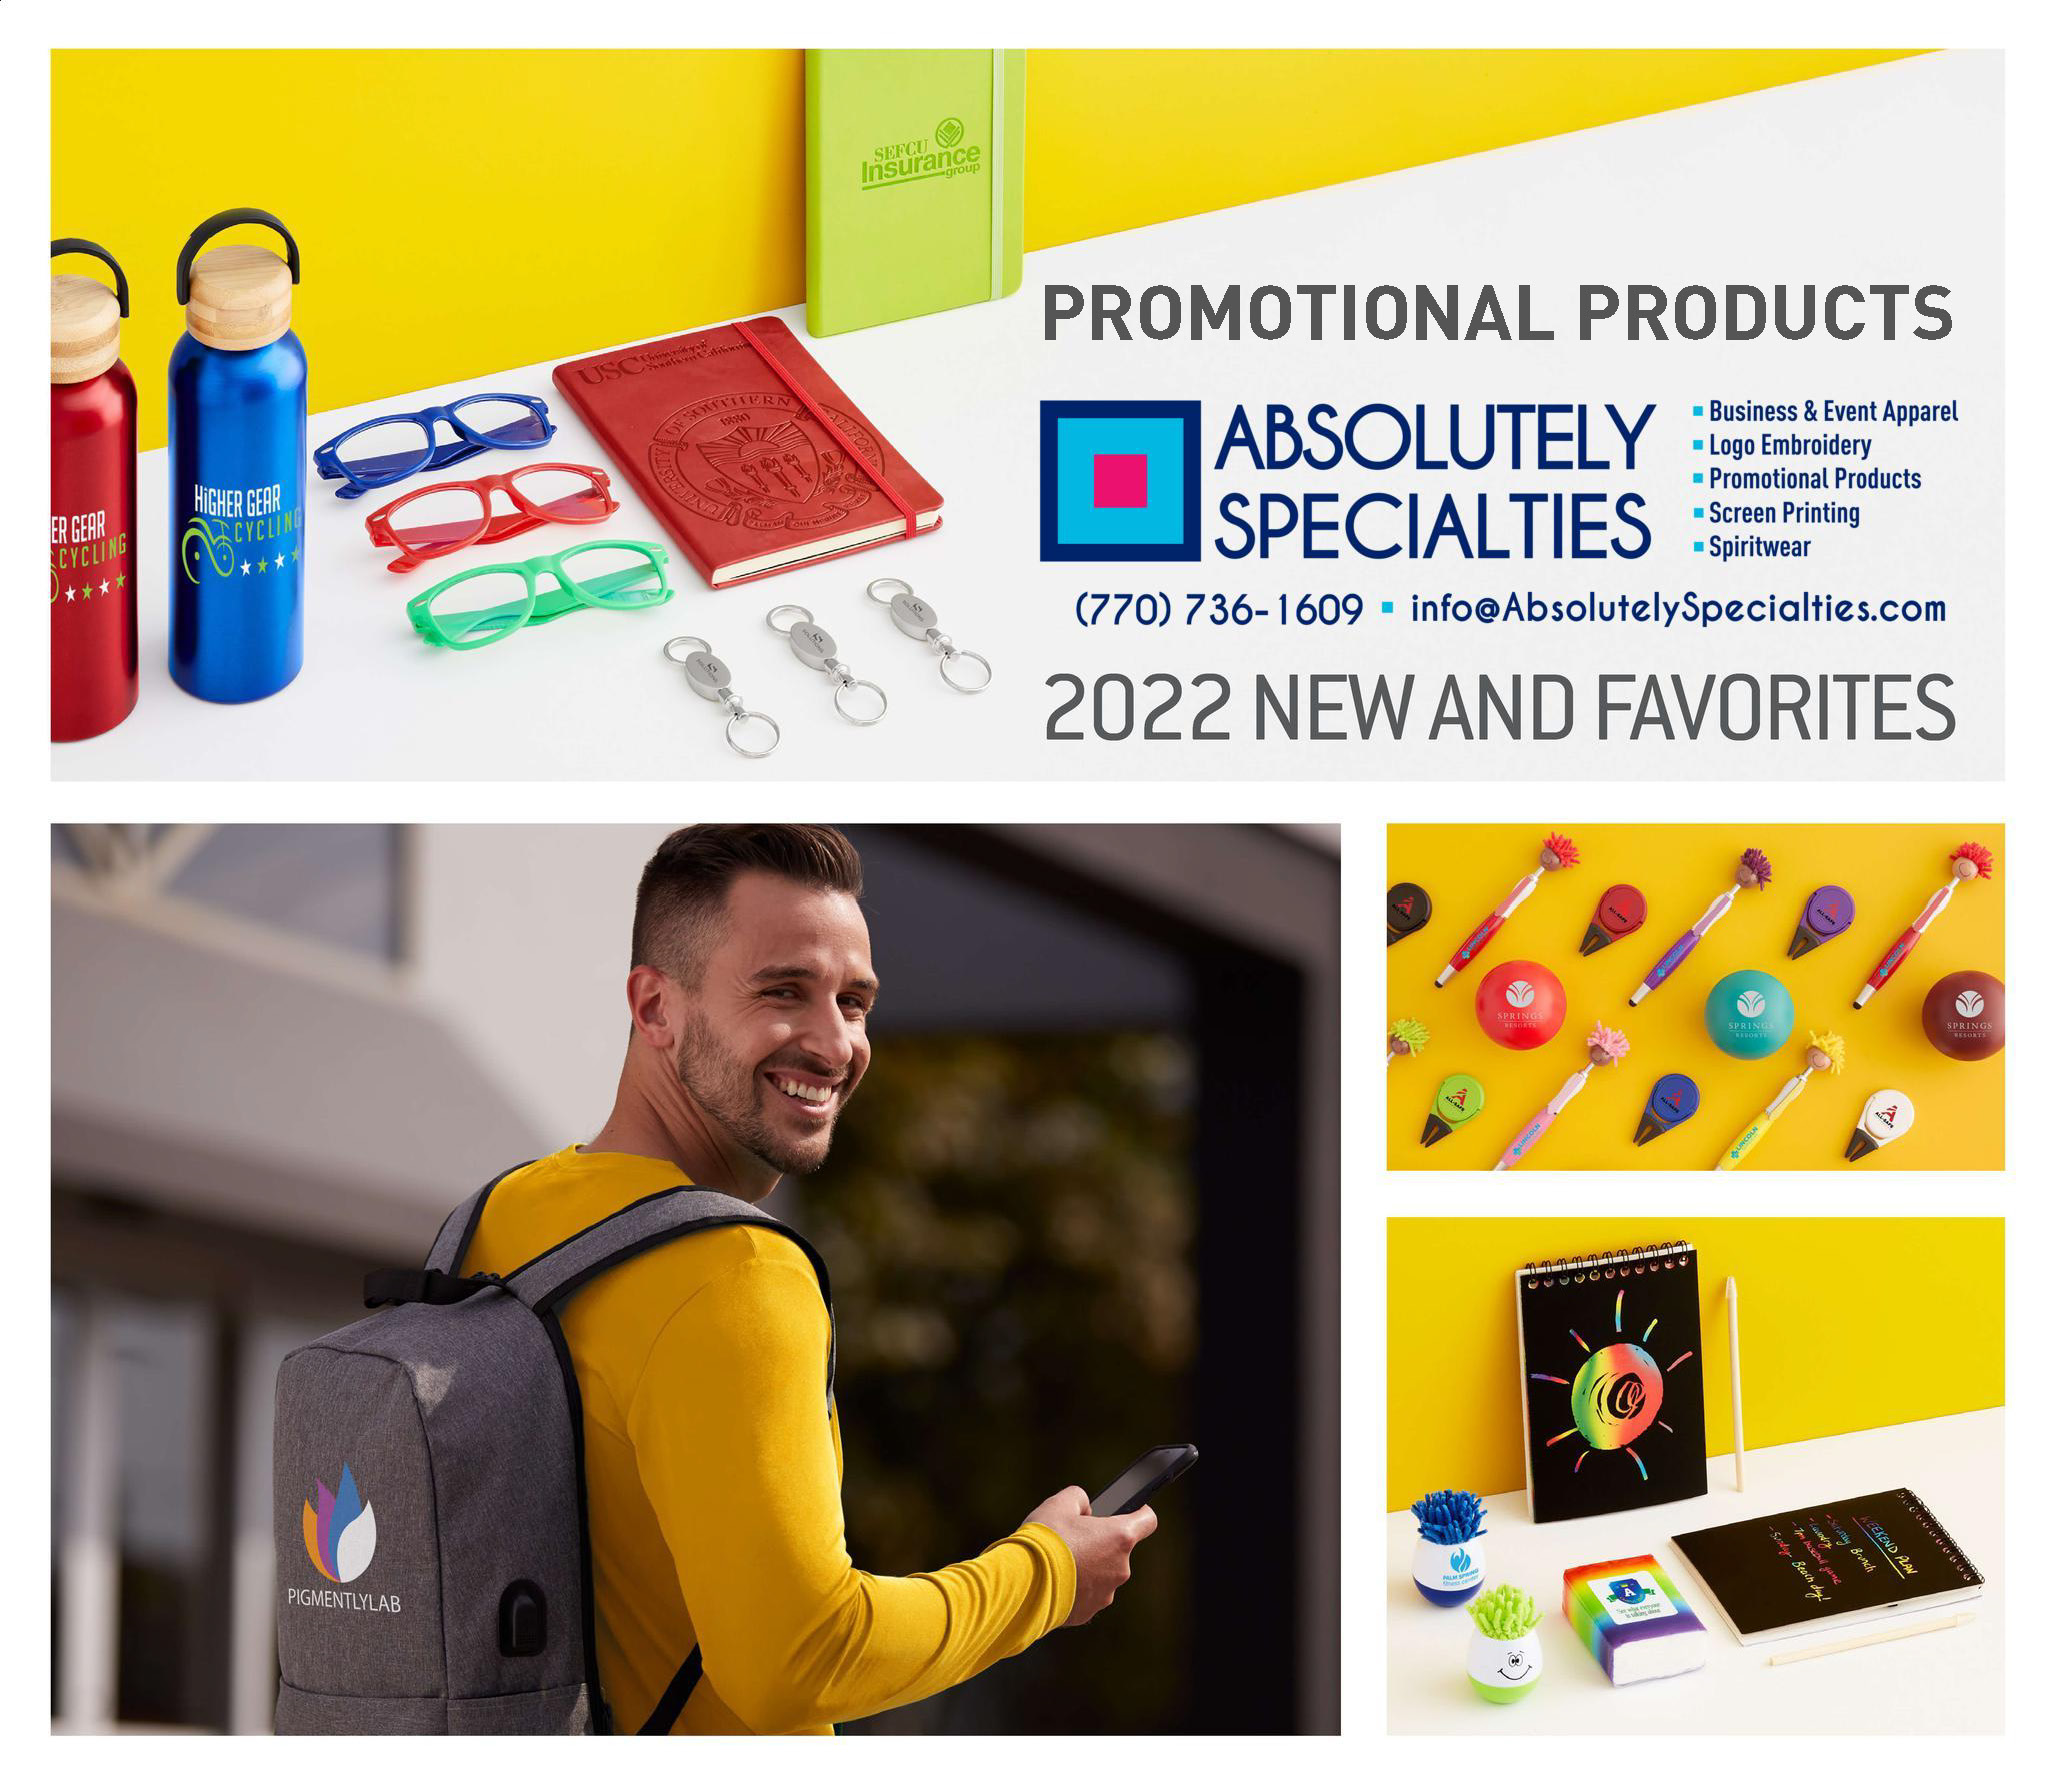 ASI Promotional Products Catalog 2022